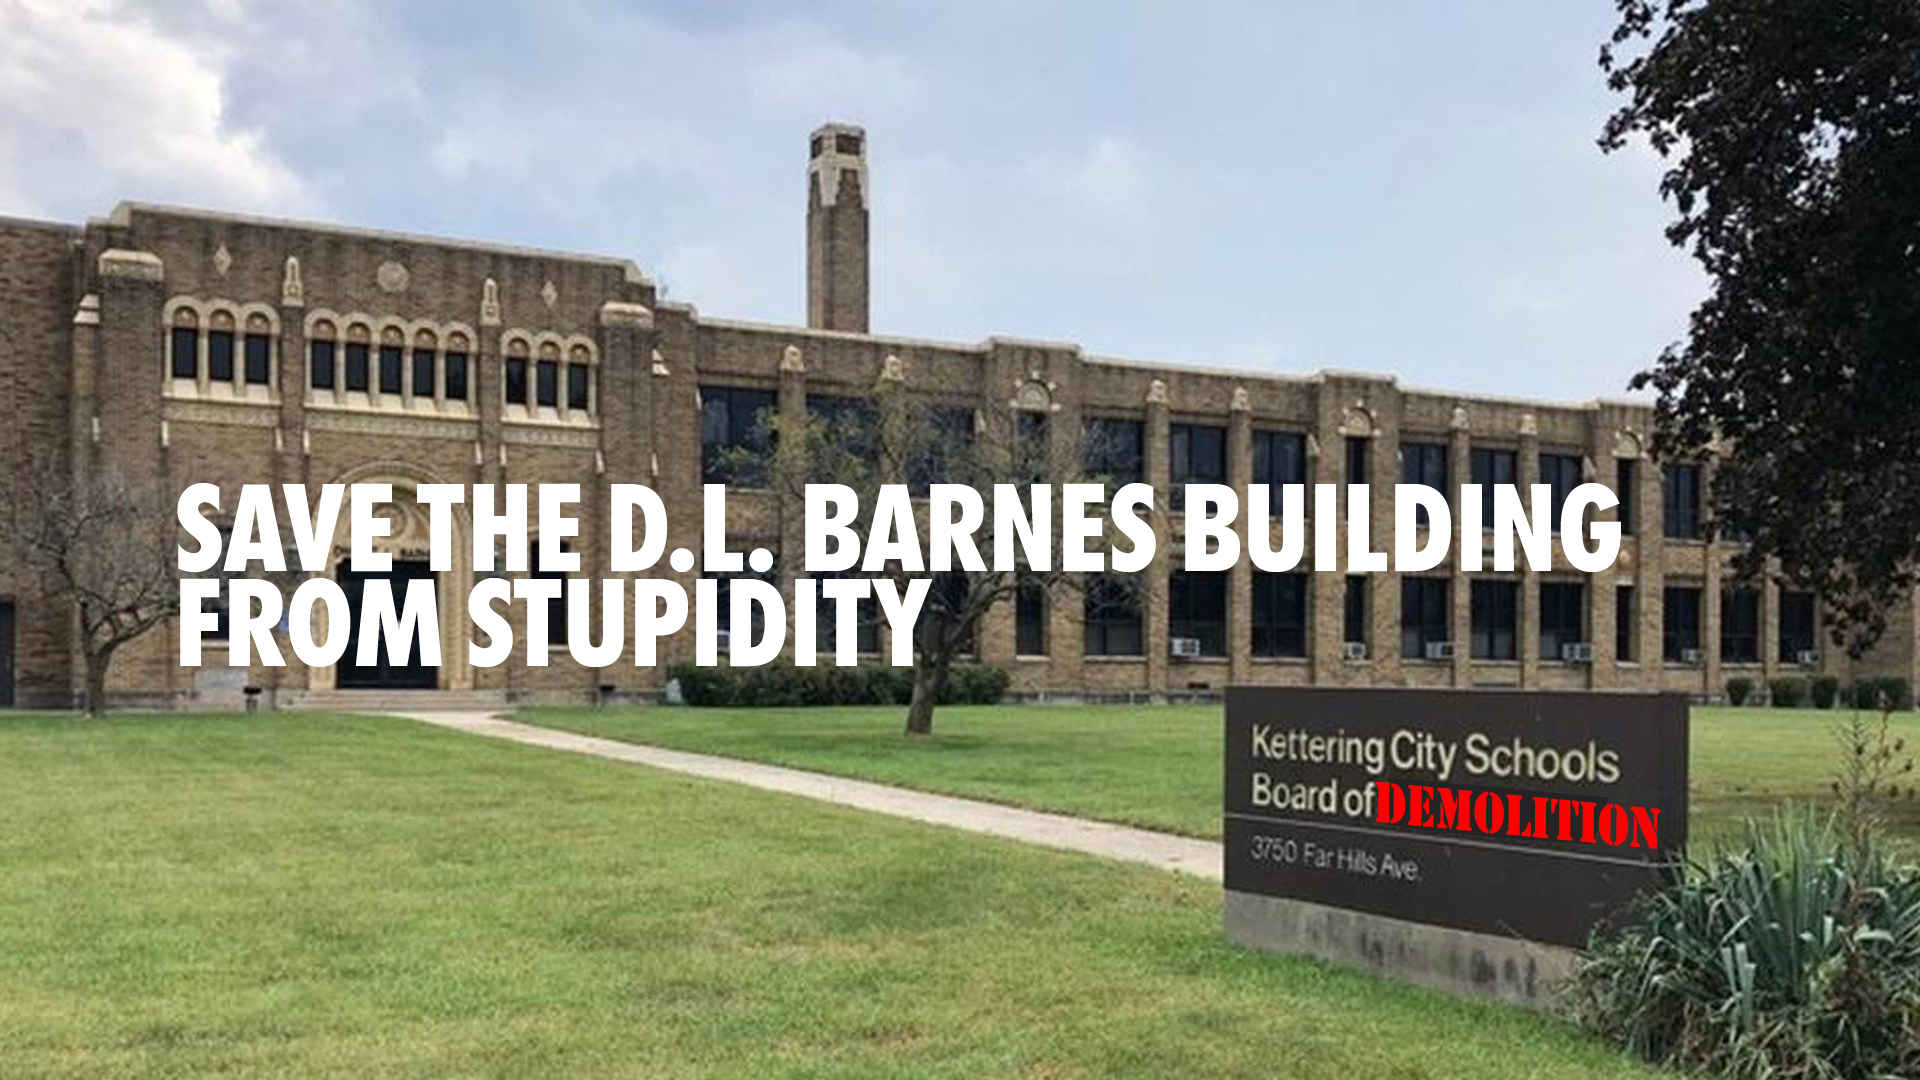 Save the DL Barnes building from stupidity in Kettering